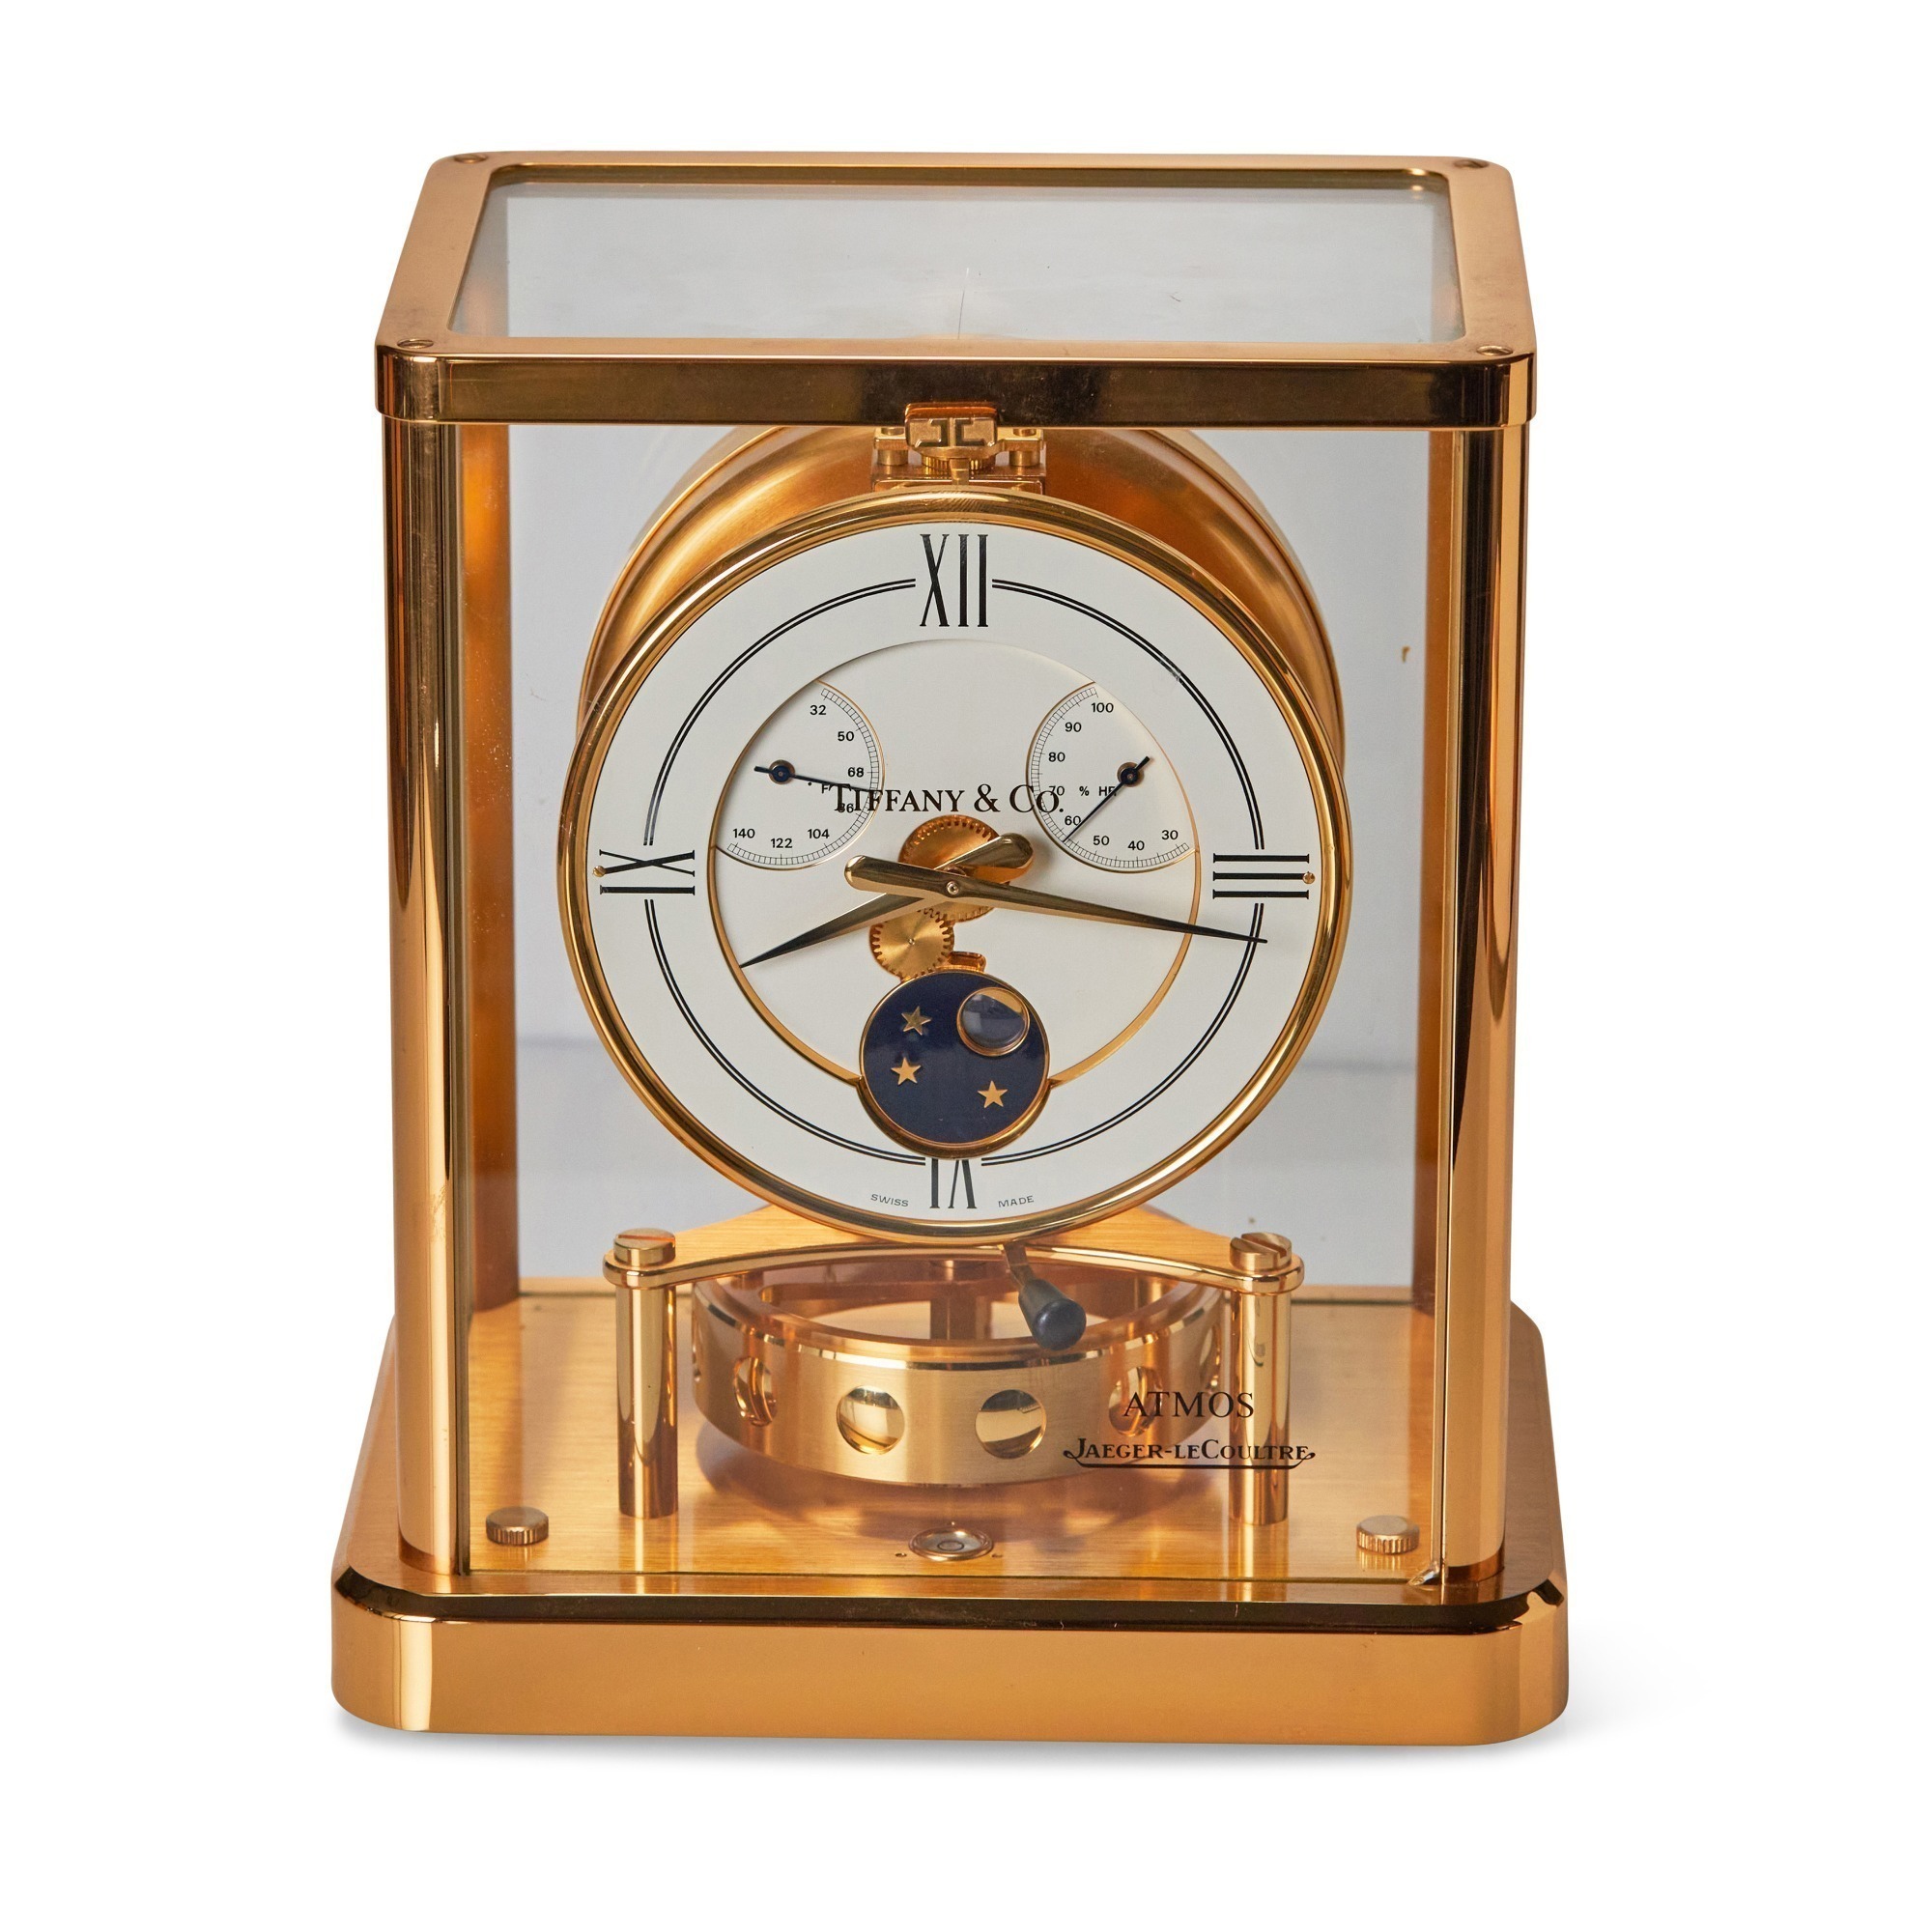 Jaeger-LeCoultre for Tiffany & Co. Atmos Elysee Perpetual Motion Mantle Clock, Circa 1997